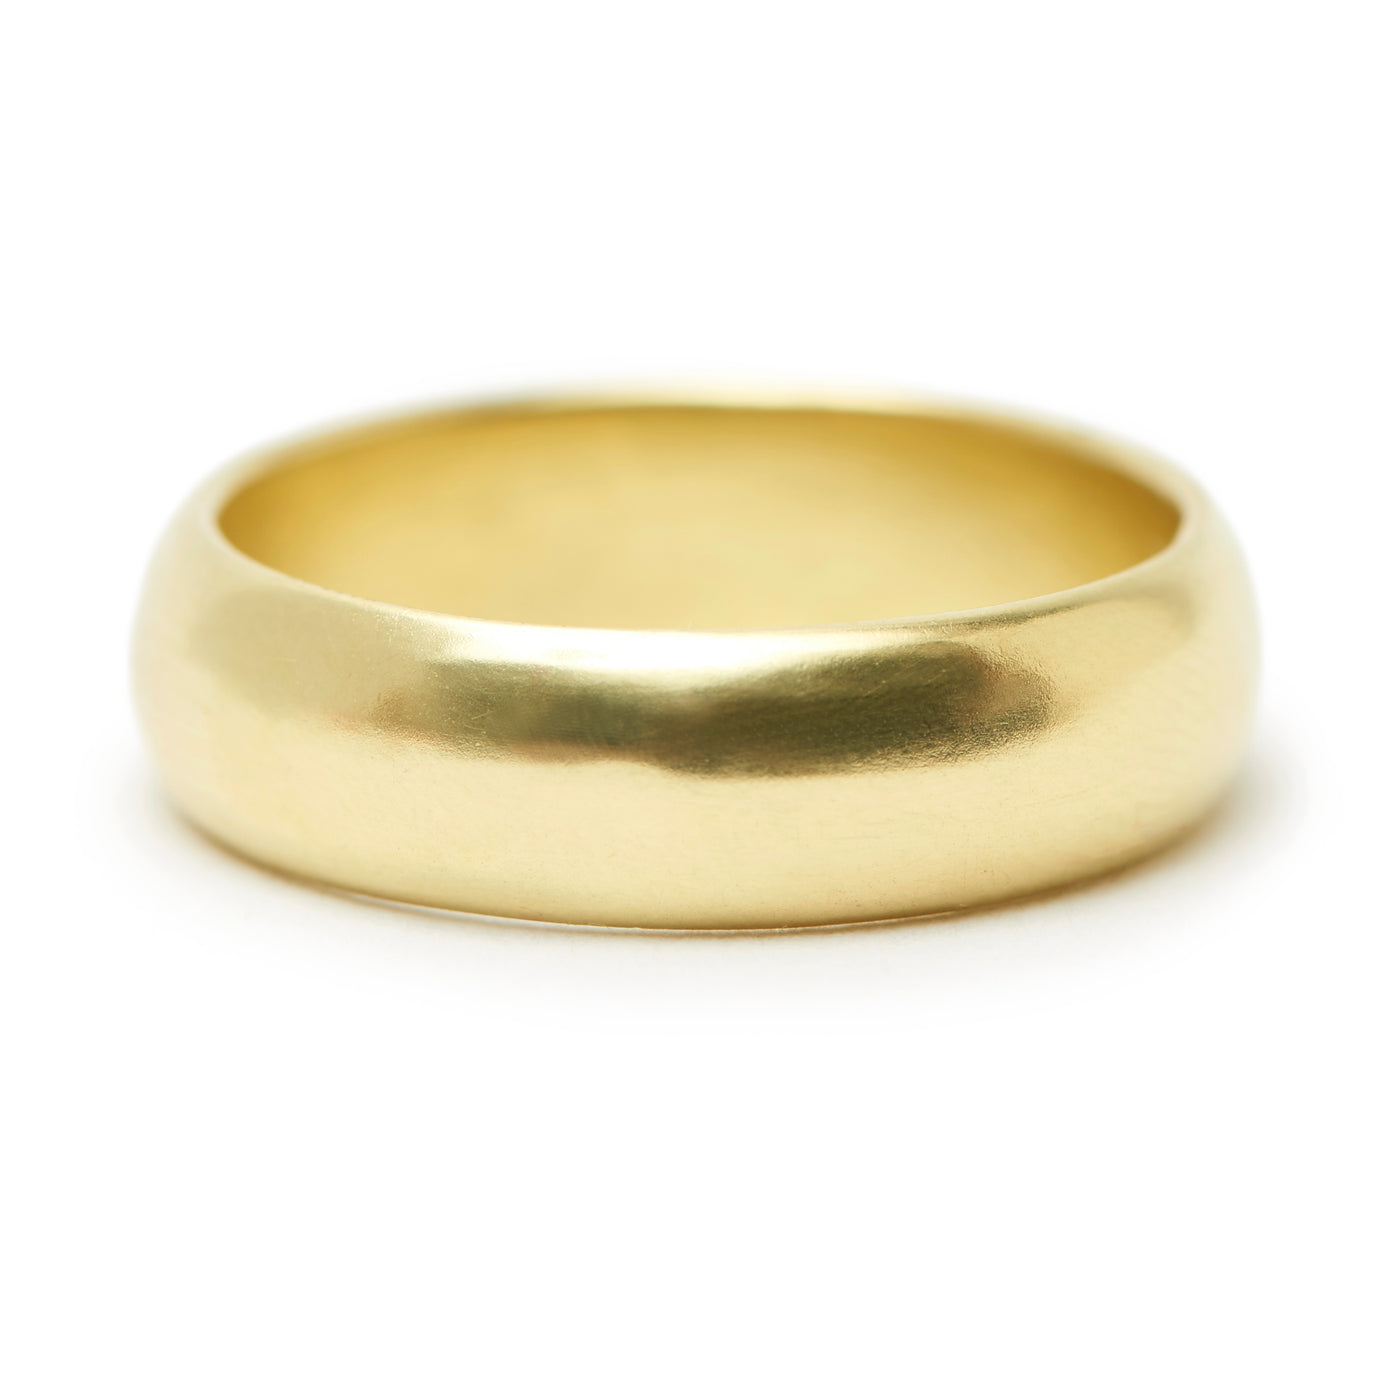 rounded gold band #3